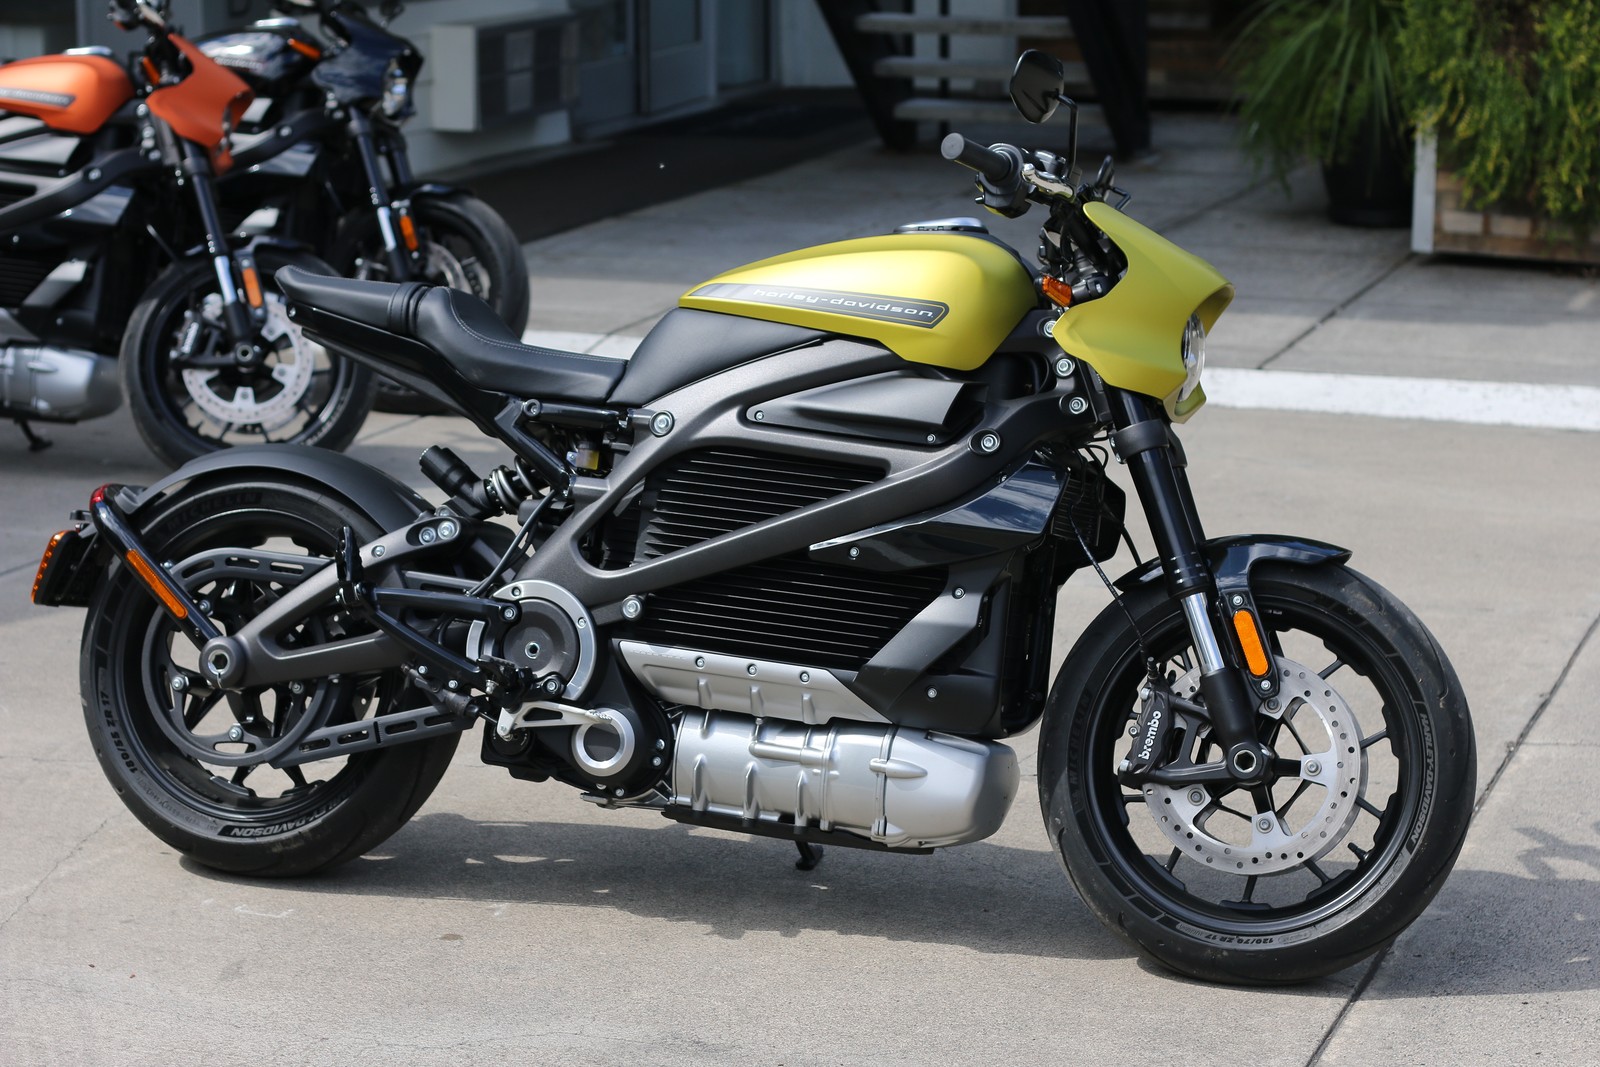 The battery allows the motorcycle to run up to 235 kilometers in urban routes.